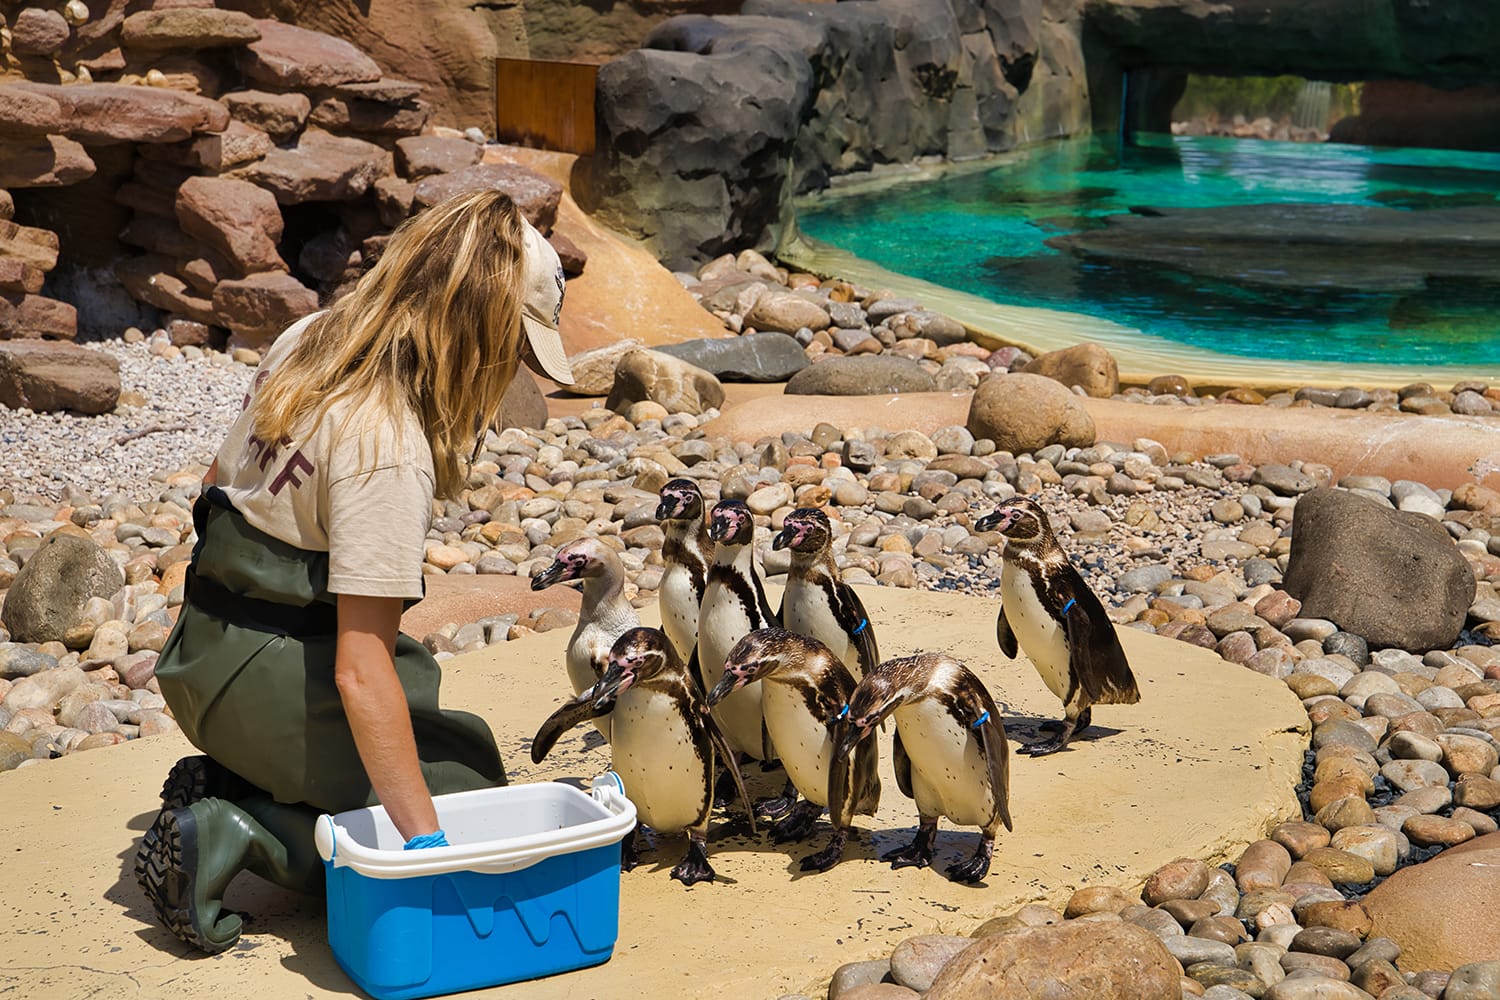 An employee of the zoo is feeding penguins in an aviary. Themed Rancho Texas Park on Lanzarote Island.